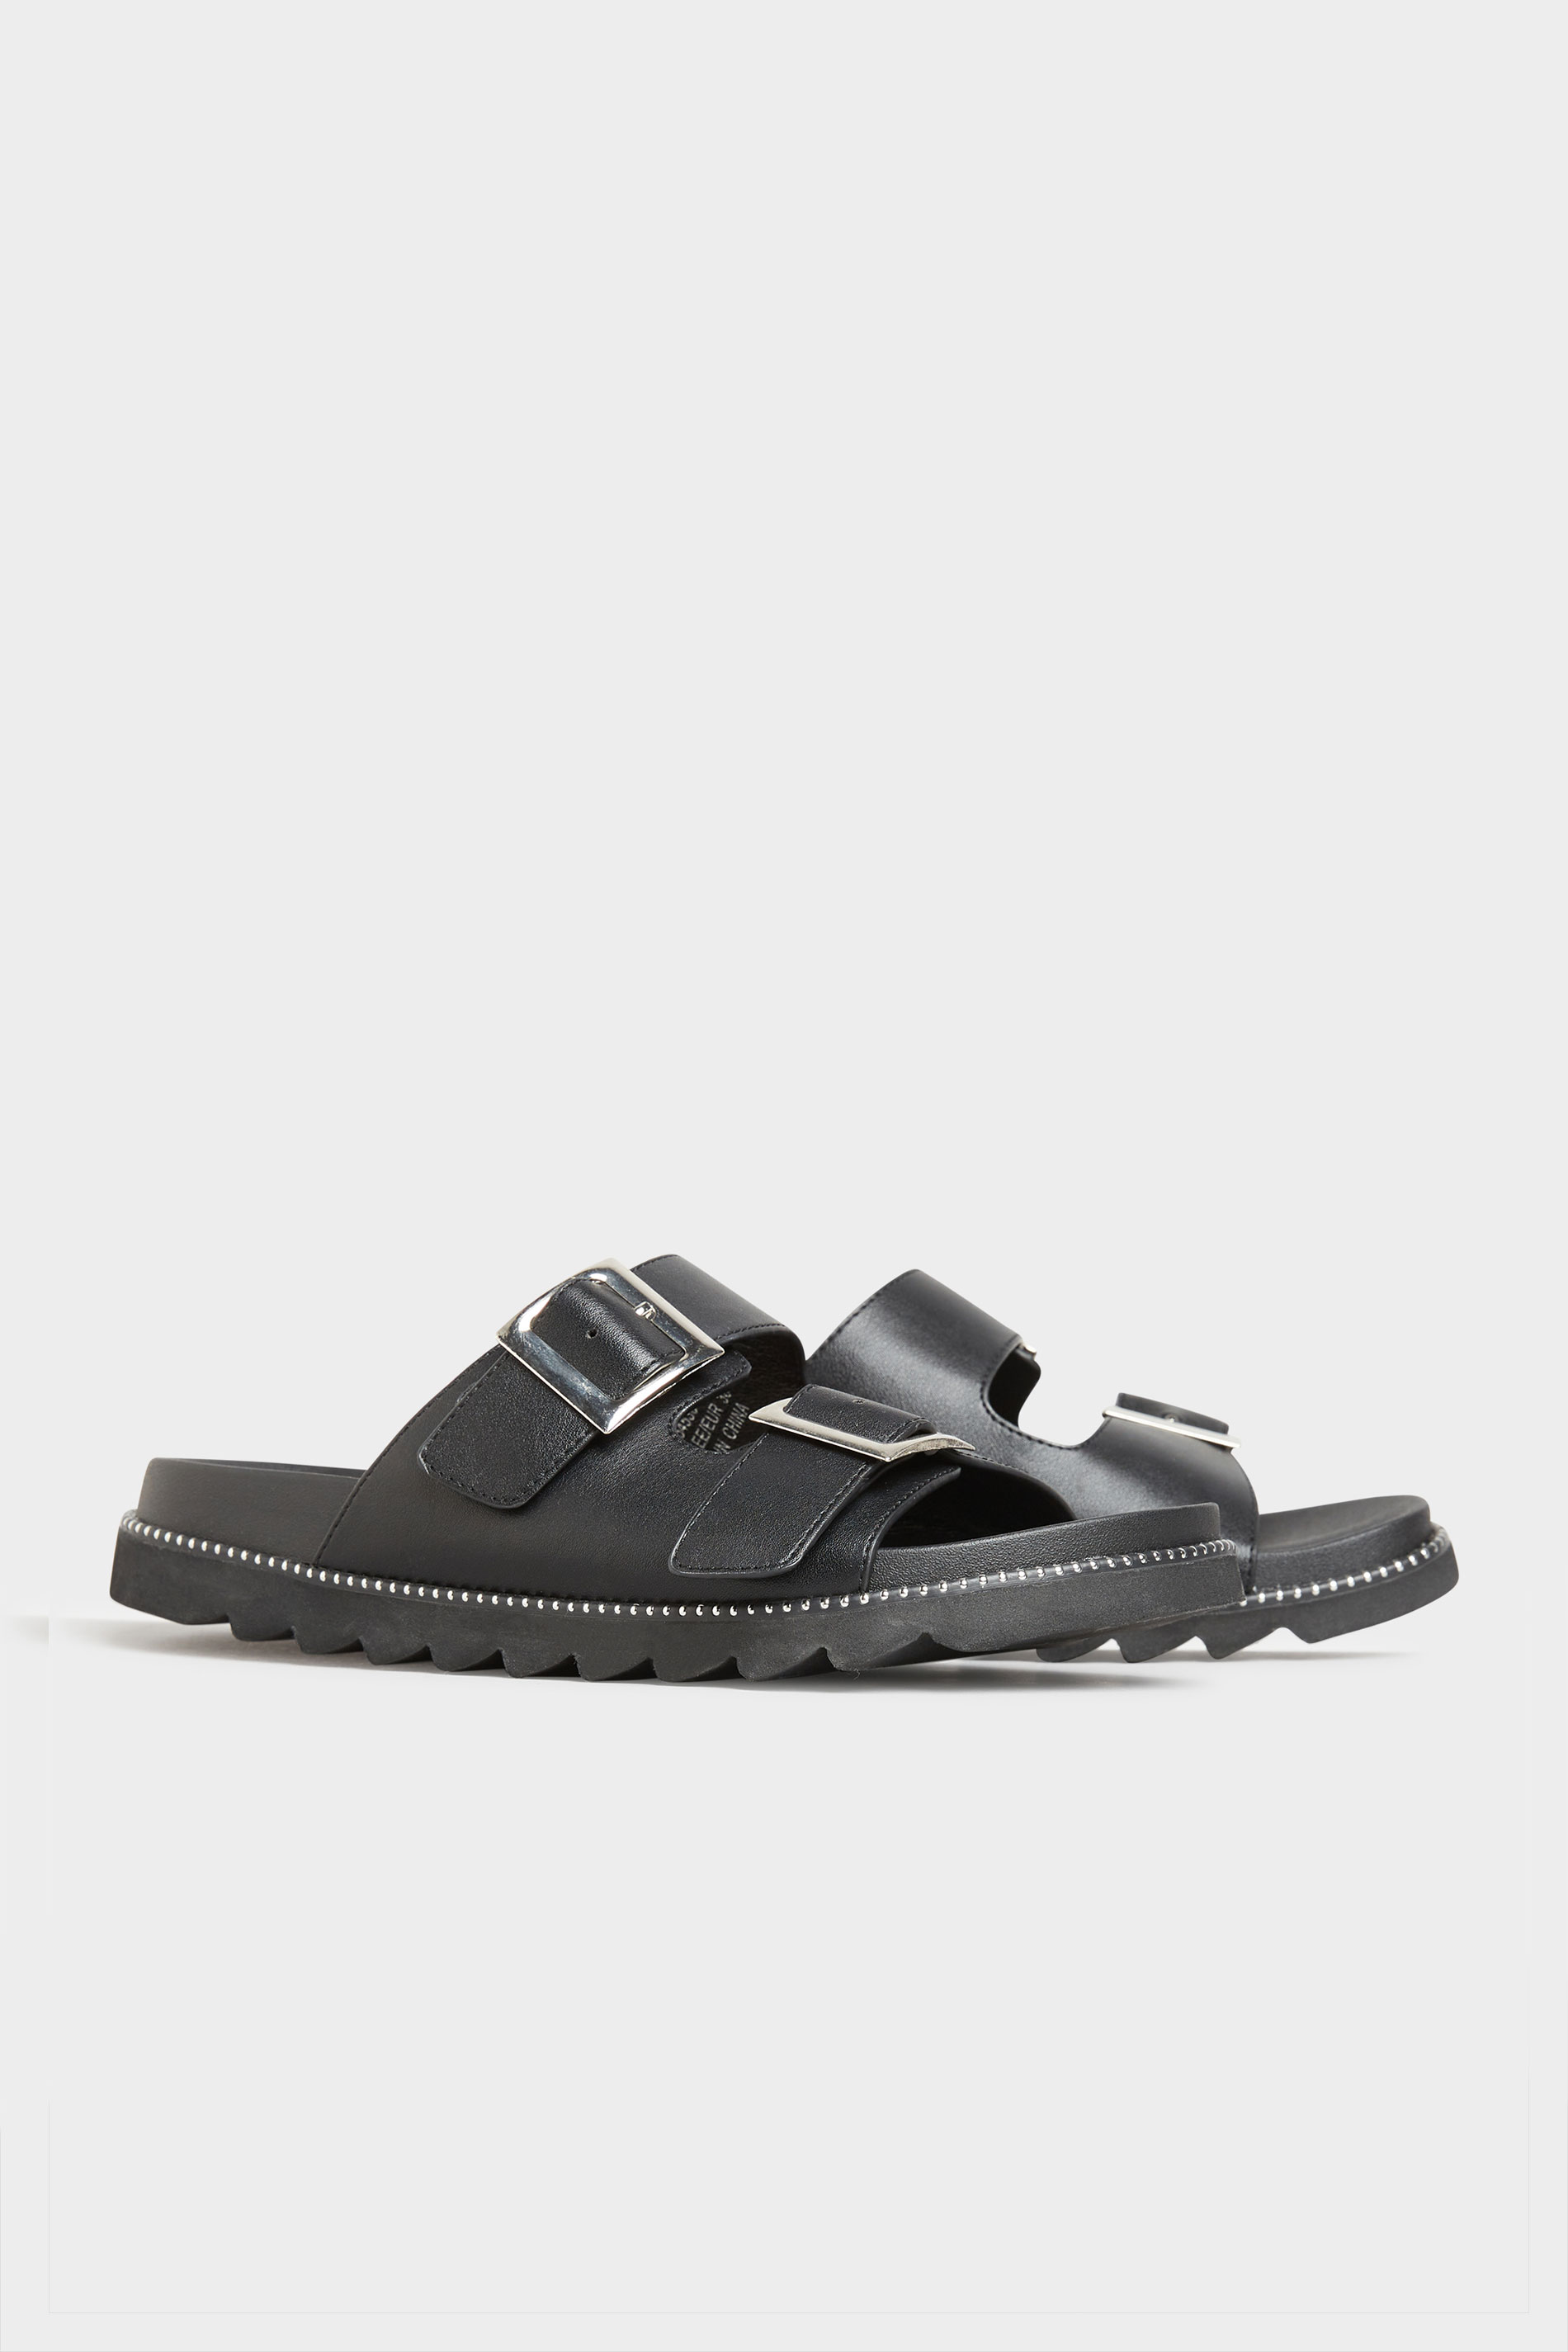 LIMITED COLLECTION Black Stud Buckle Sandal In Extra Wide Fit | Long ...